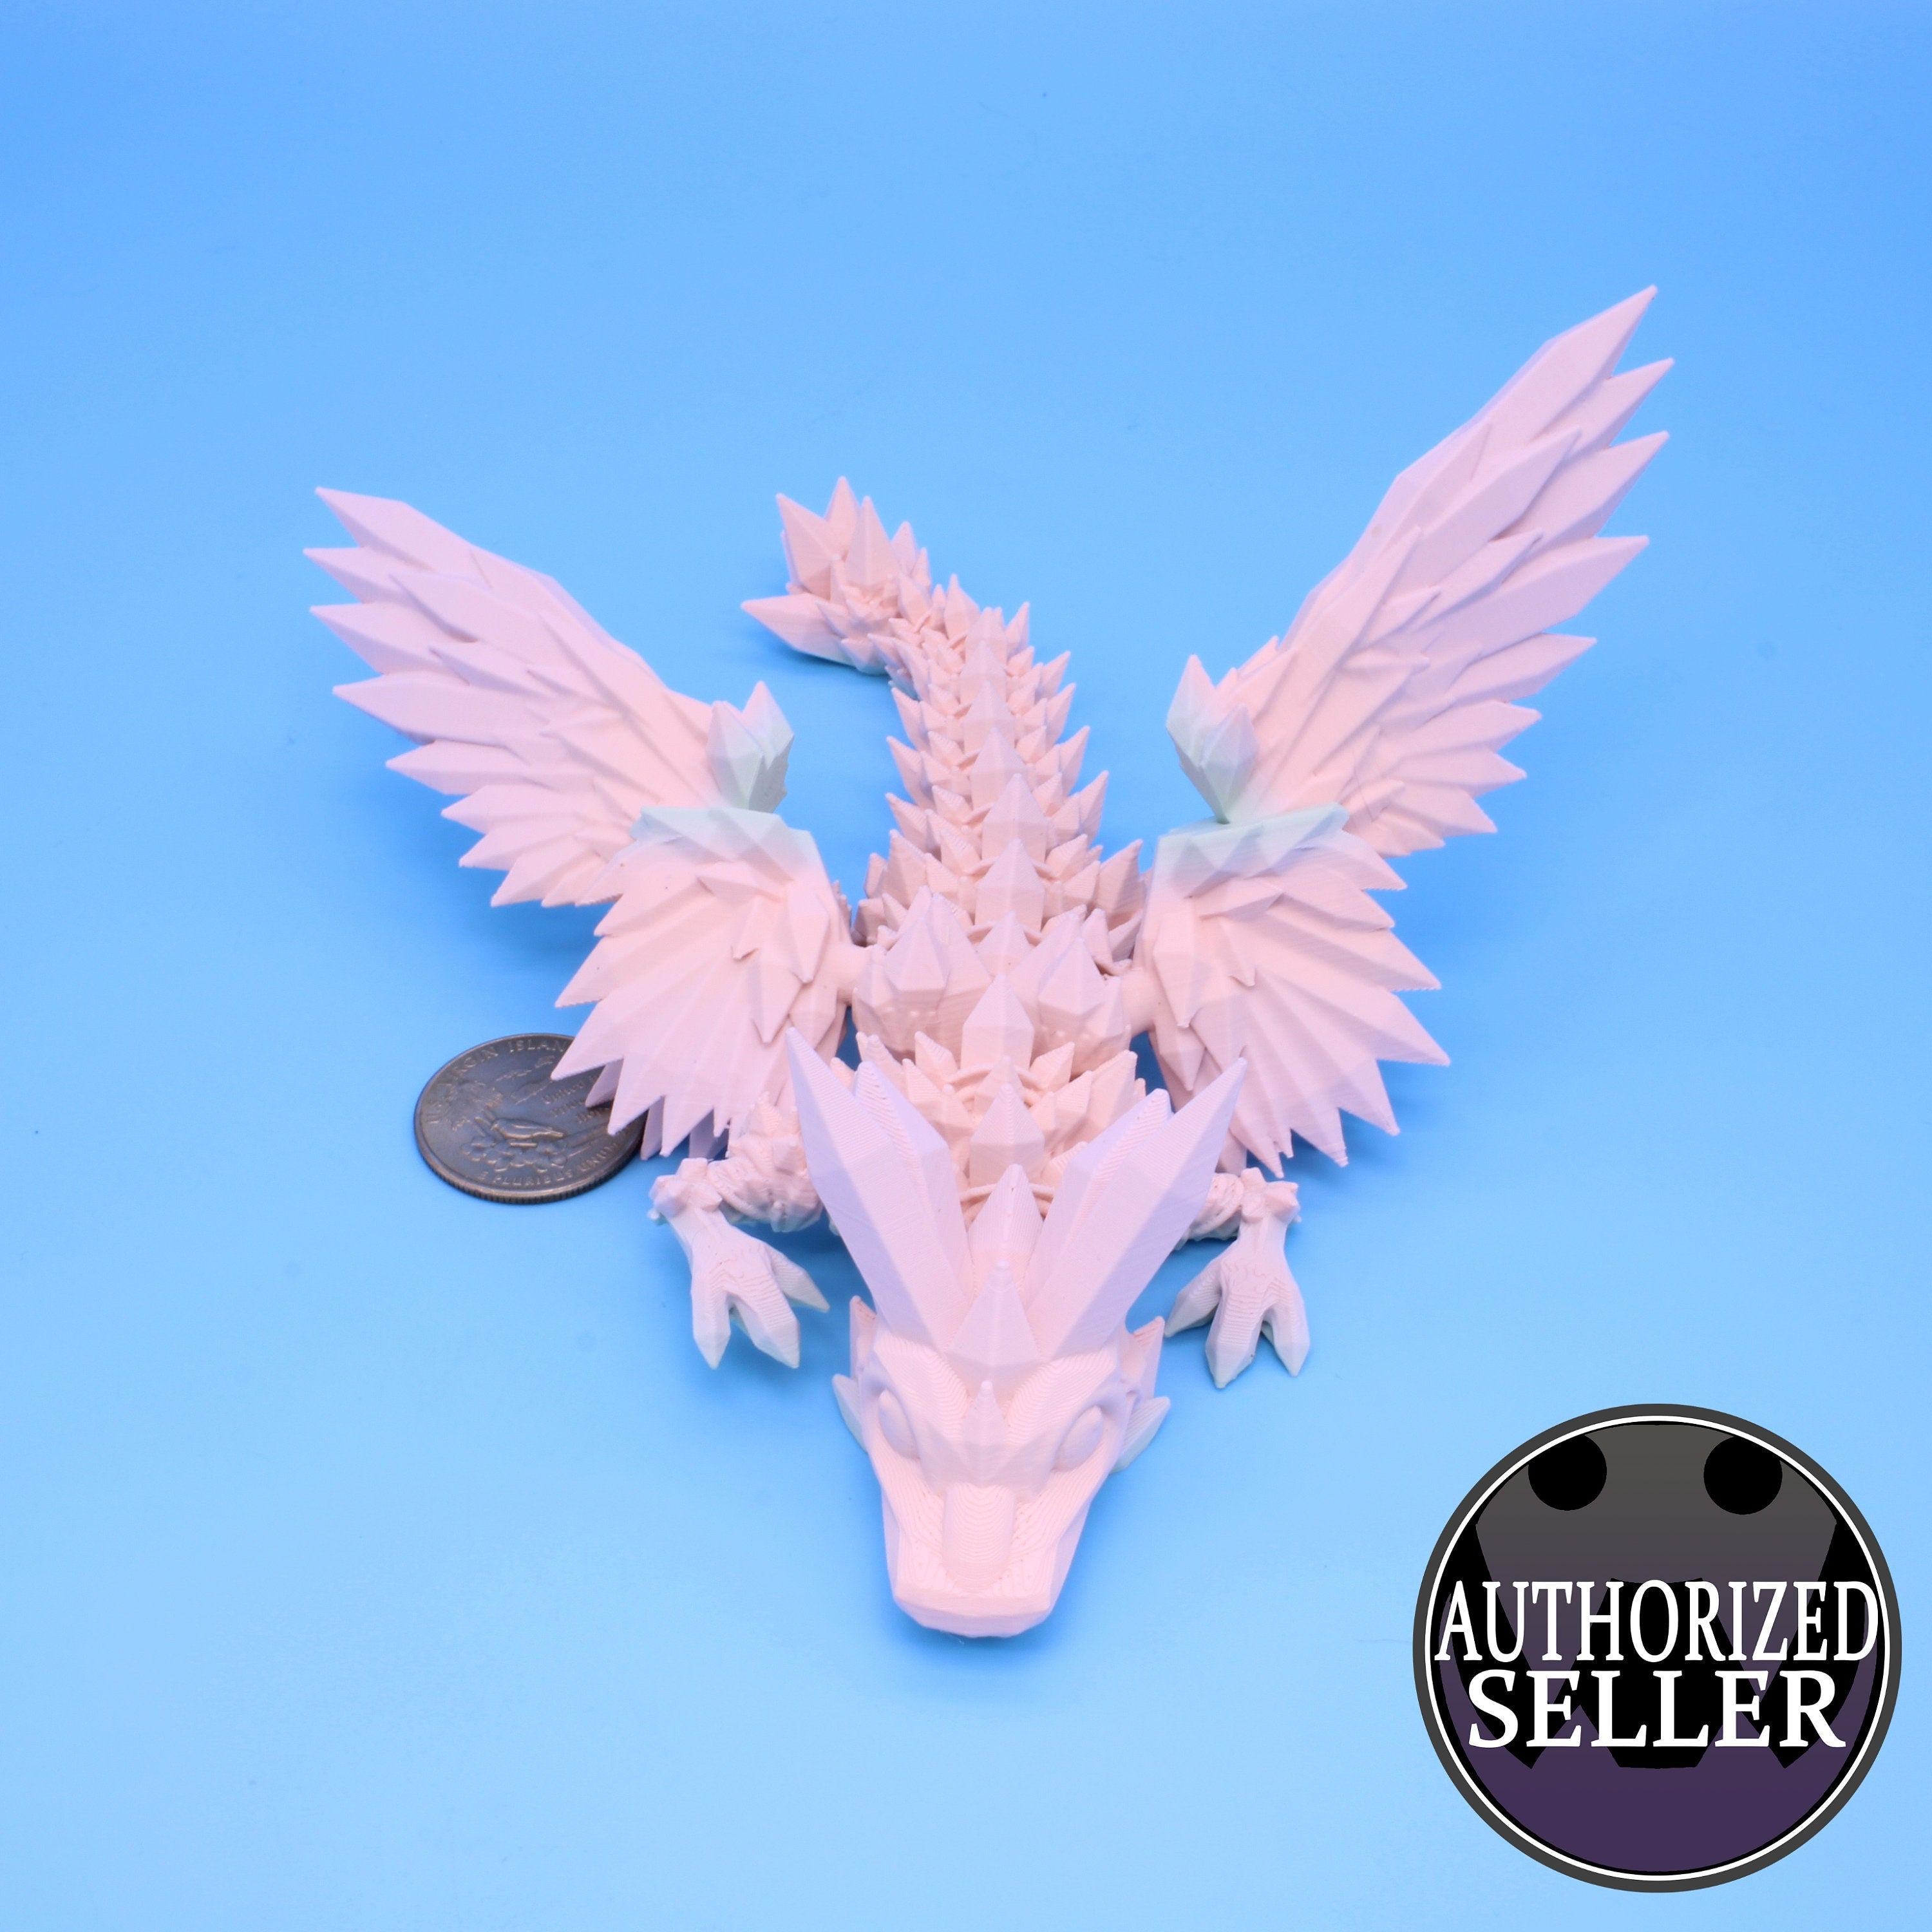 Baby Crystal Wing Dragon | Miniature | 3D printed | 7 in.